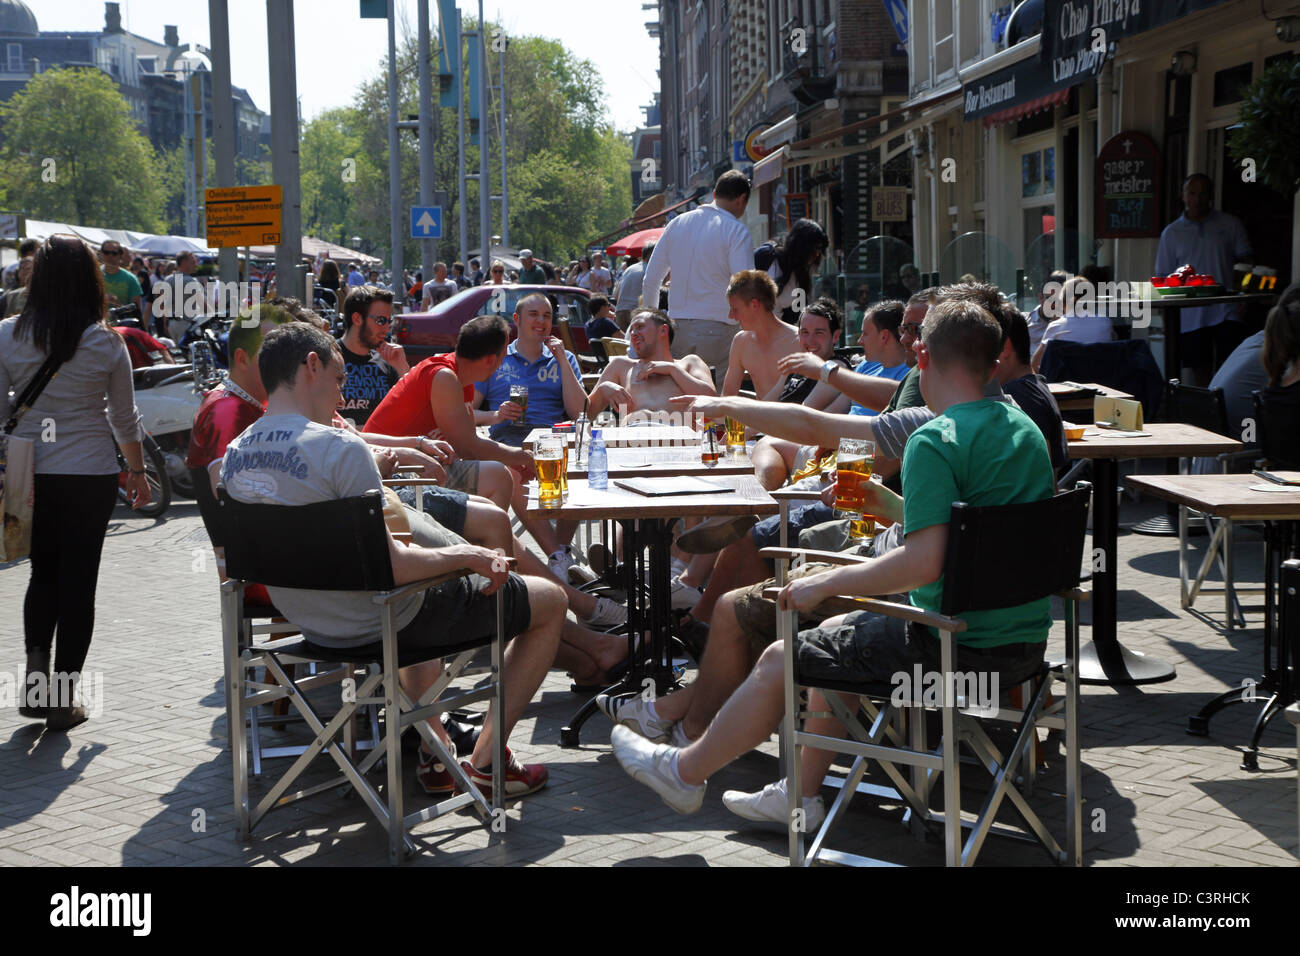 PEOPLE DRINKING OUTSIDE CAFE MONNIKENSTRAAT AMSTERDAM 23 April 2011 Stock Photo